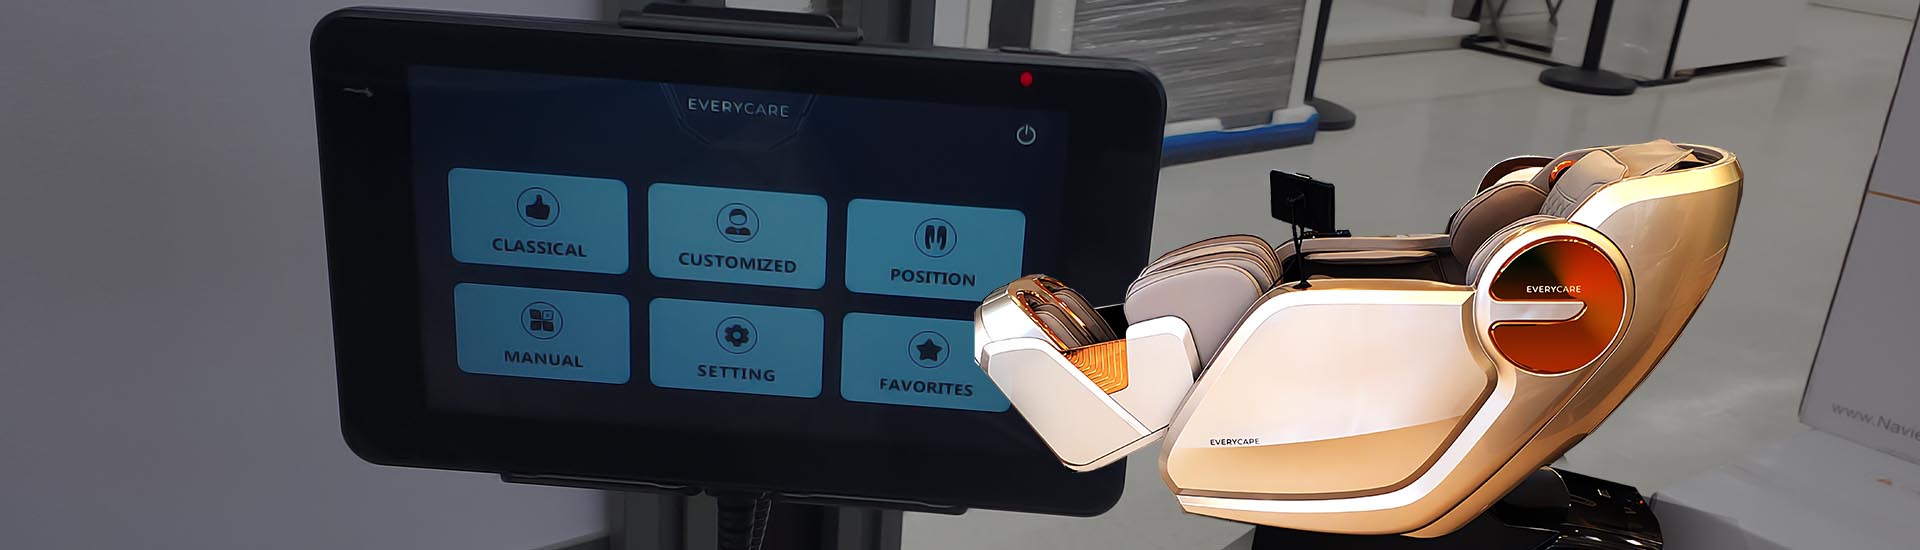 An image ithat shows the Everycare 7300 and its tablet controller